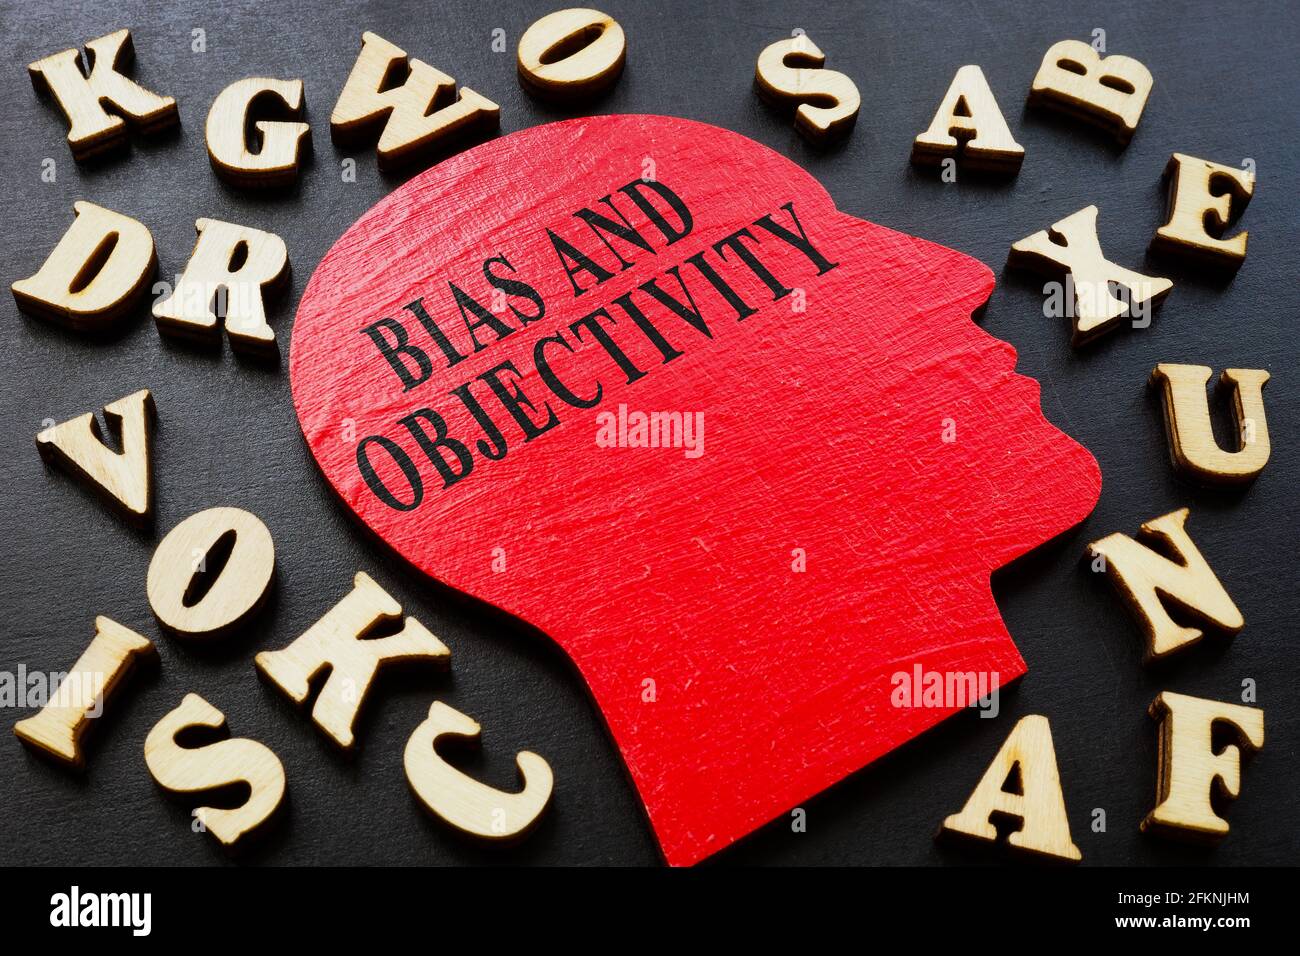 Words bias and objectivity on the head shape and letters. Stock Photo